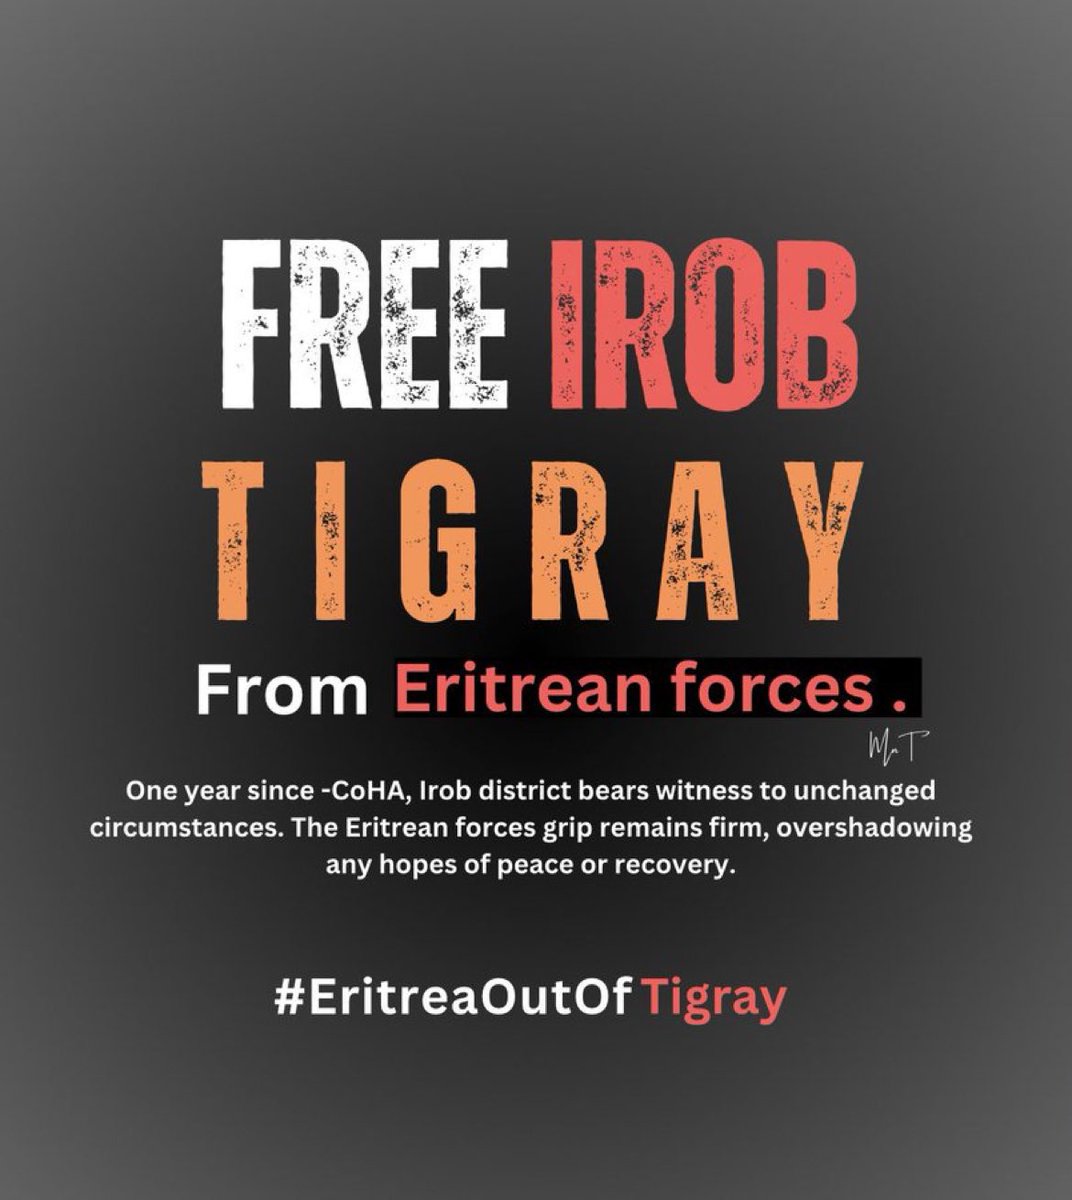 #TigrayEthnicCleansing: the #Irob ethnic minorities are facing forced annexation, denial of aid and services, and compulsory military service under a false #EritreanOutOfTigray identity.

@UKParliament @EU_Commission
@StateDept @eu_eeas @UN_HRC @POTUS @SecBlinken @StateDept